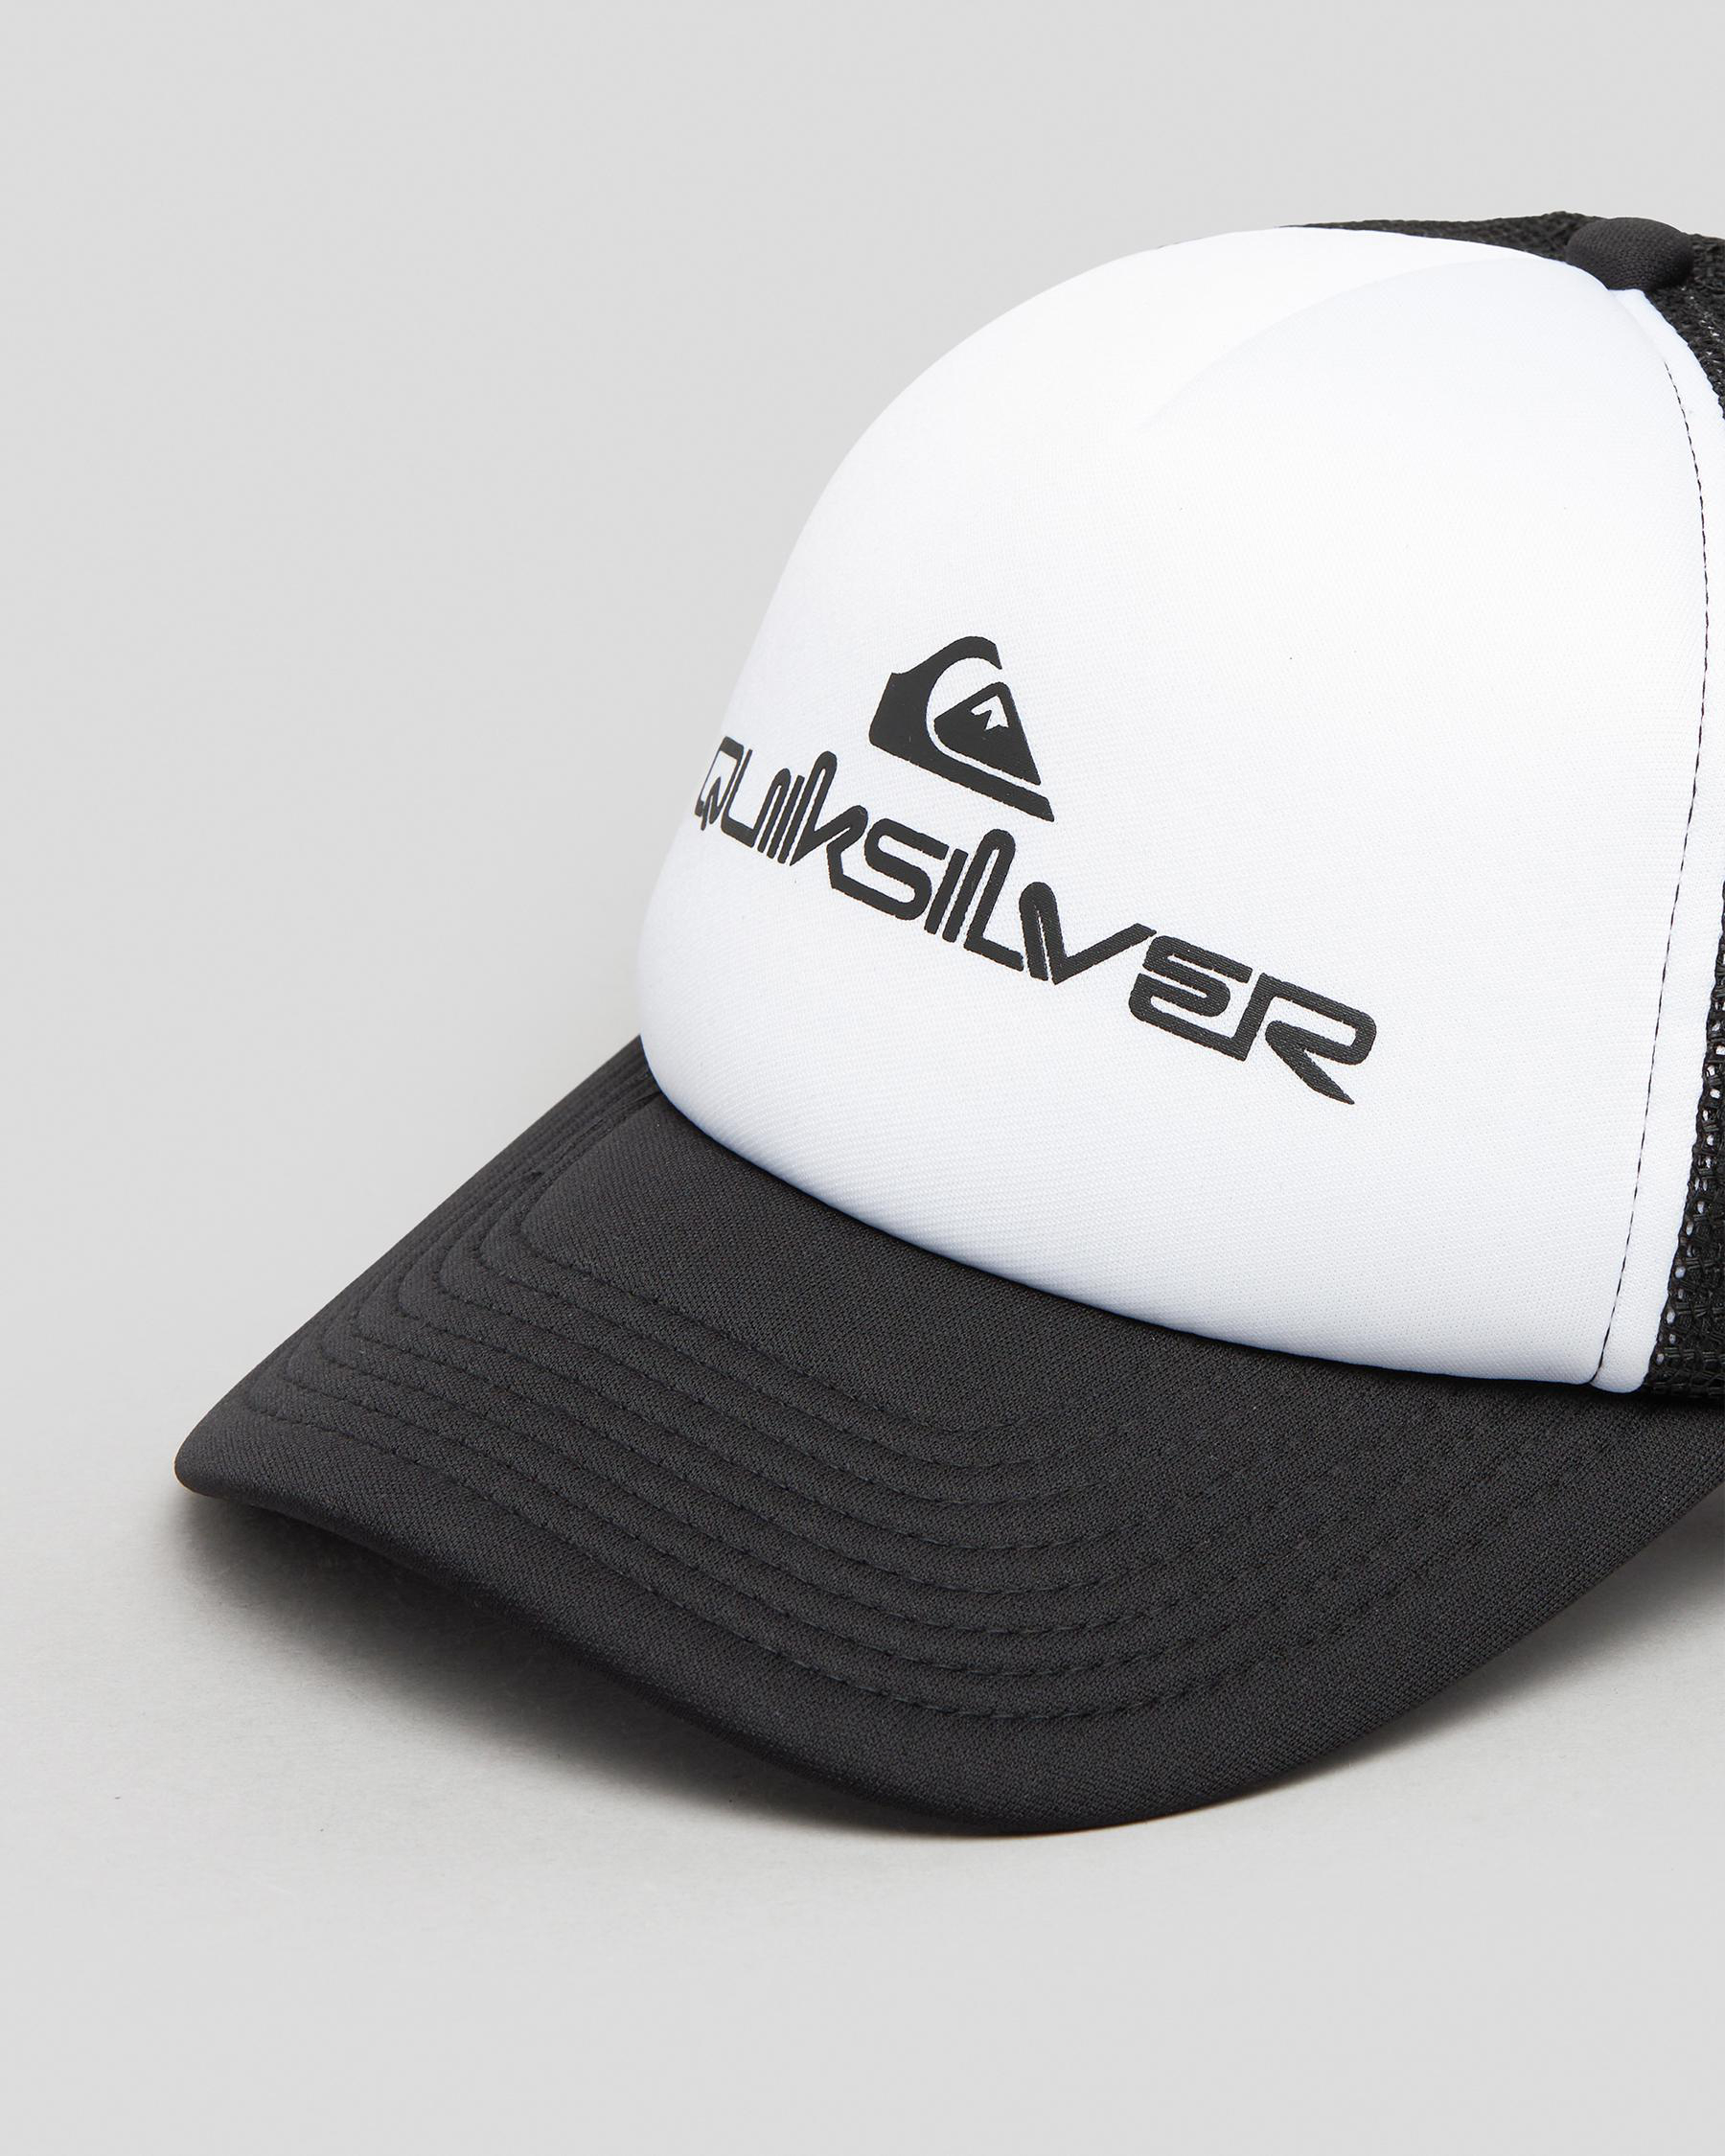 Quiksilver Omnistack Trucker Cap Shipping Returns Beach In White United & City - States FREE* - Easy